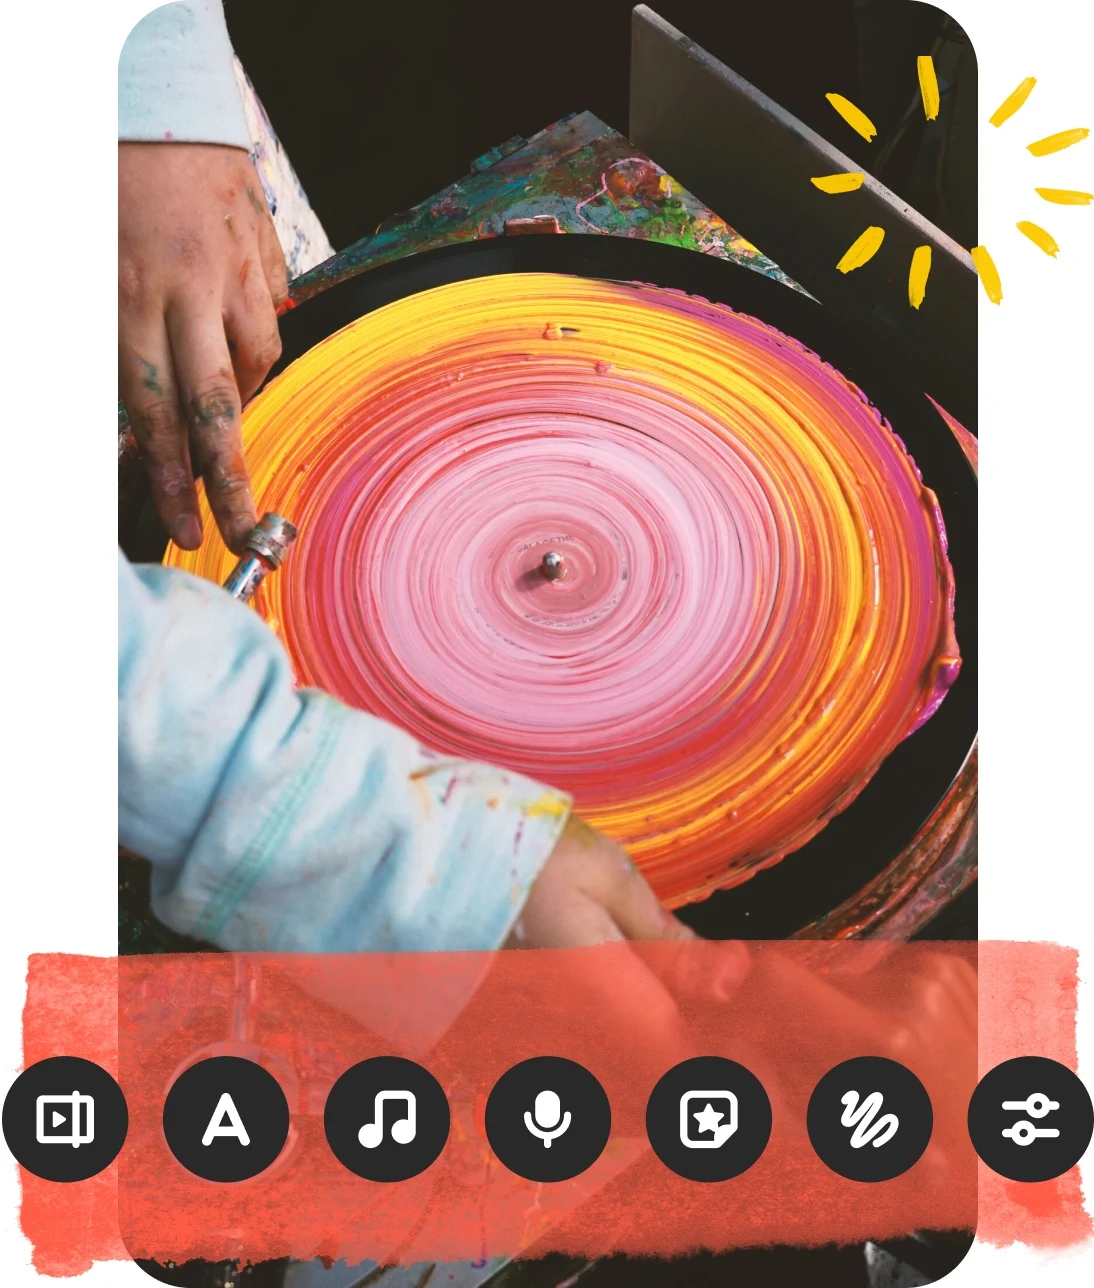 Collage of Pin special features icons and an image of hands spinning a painted record